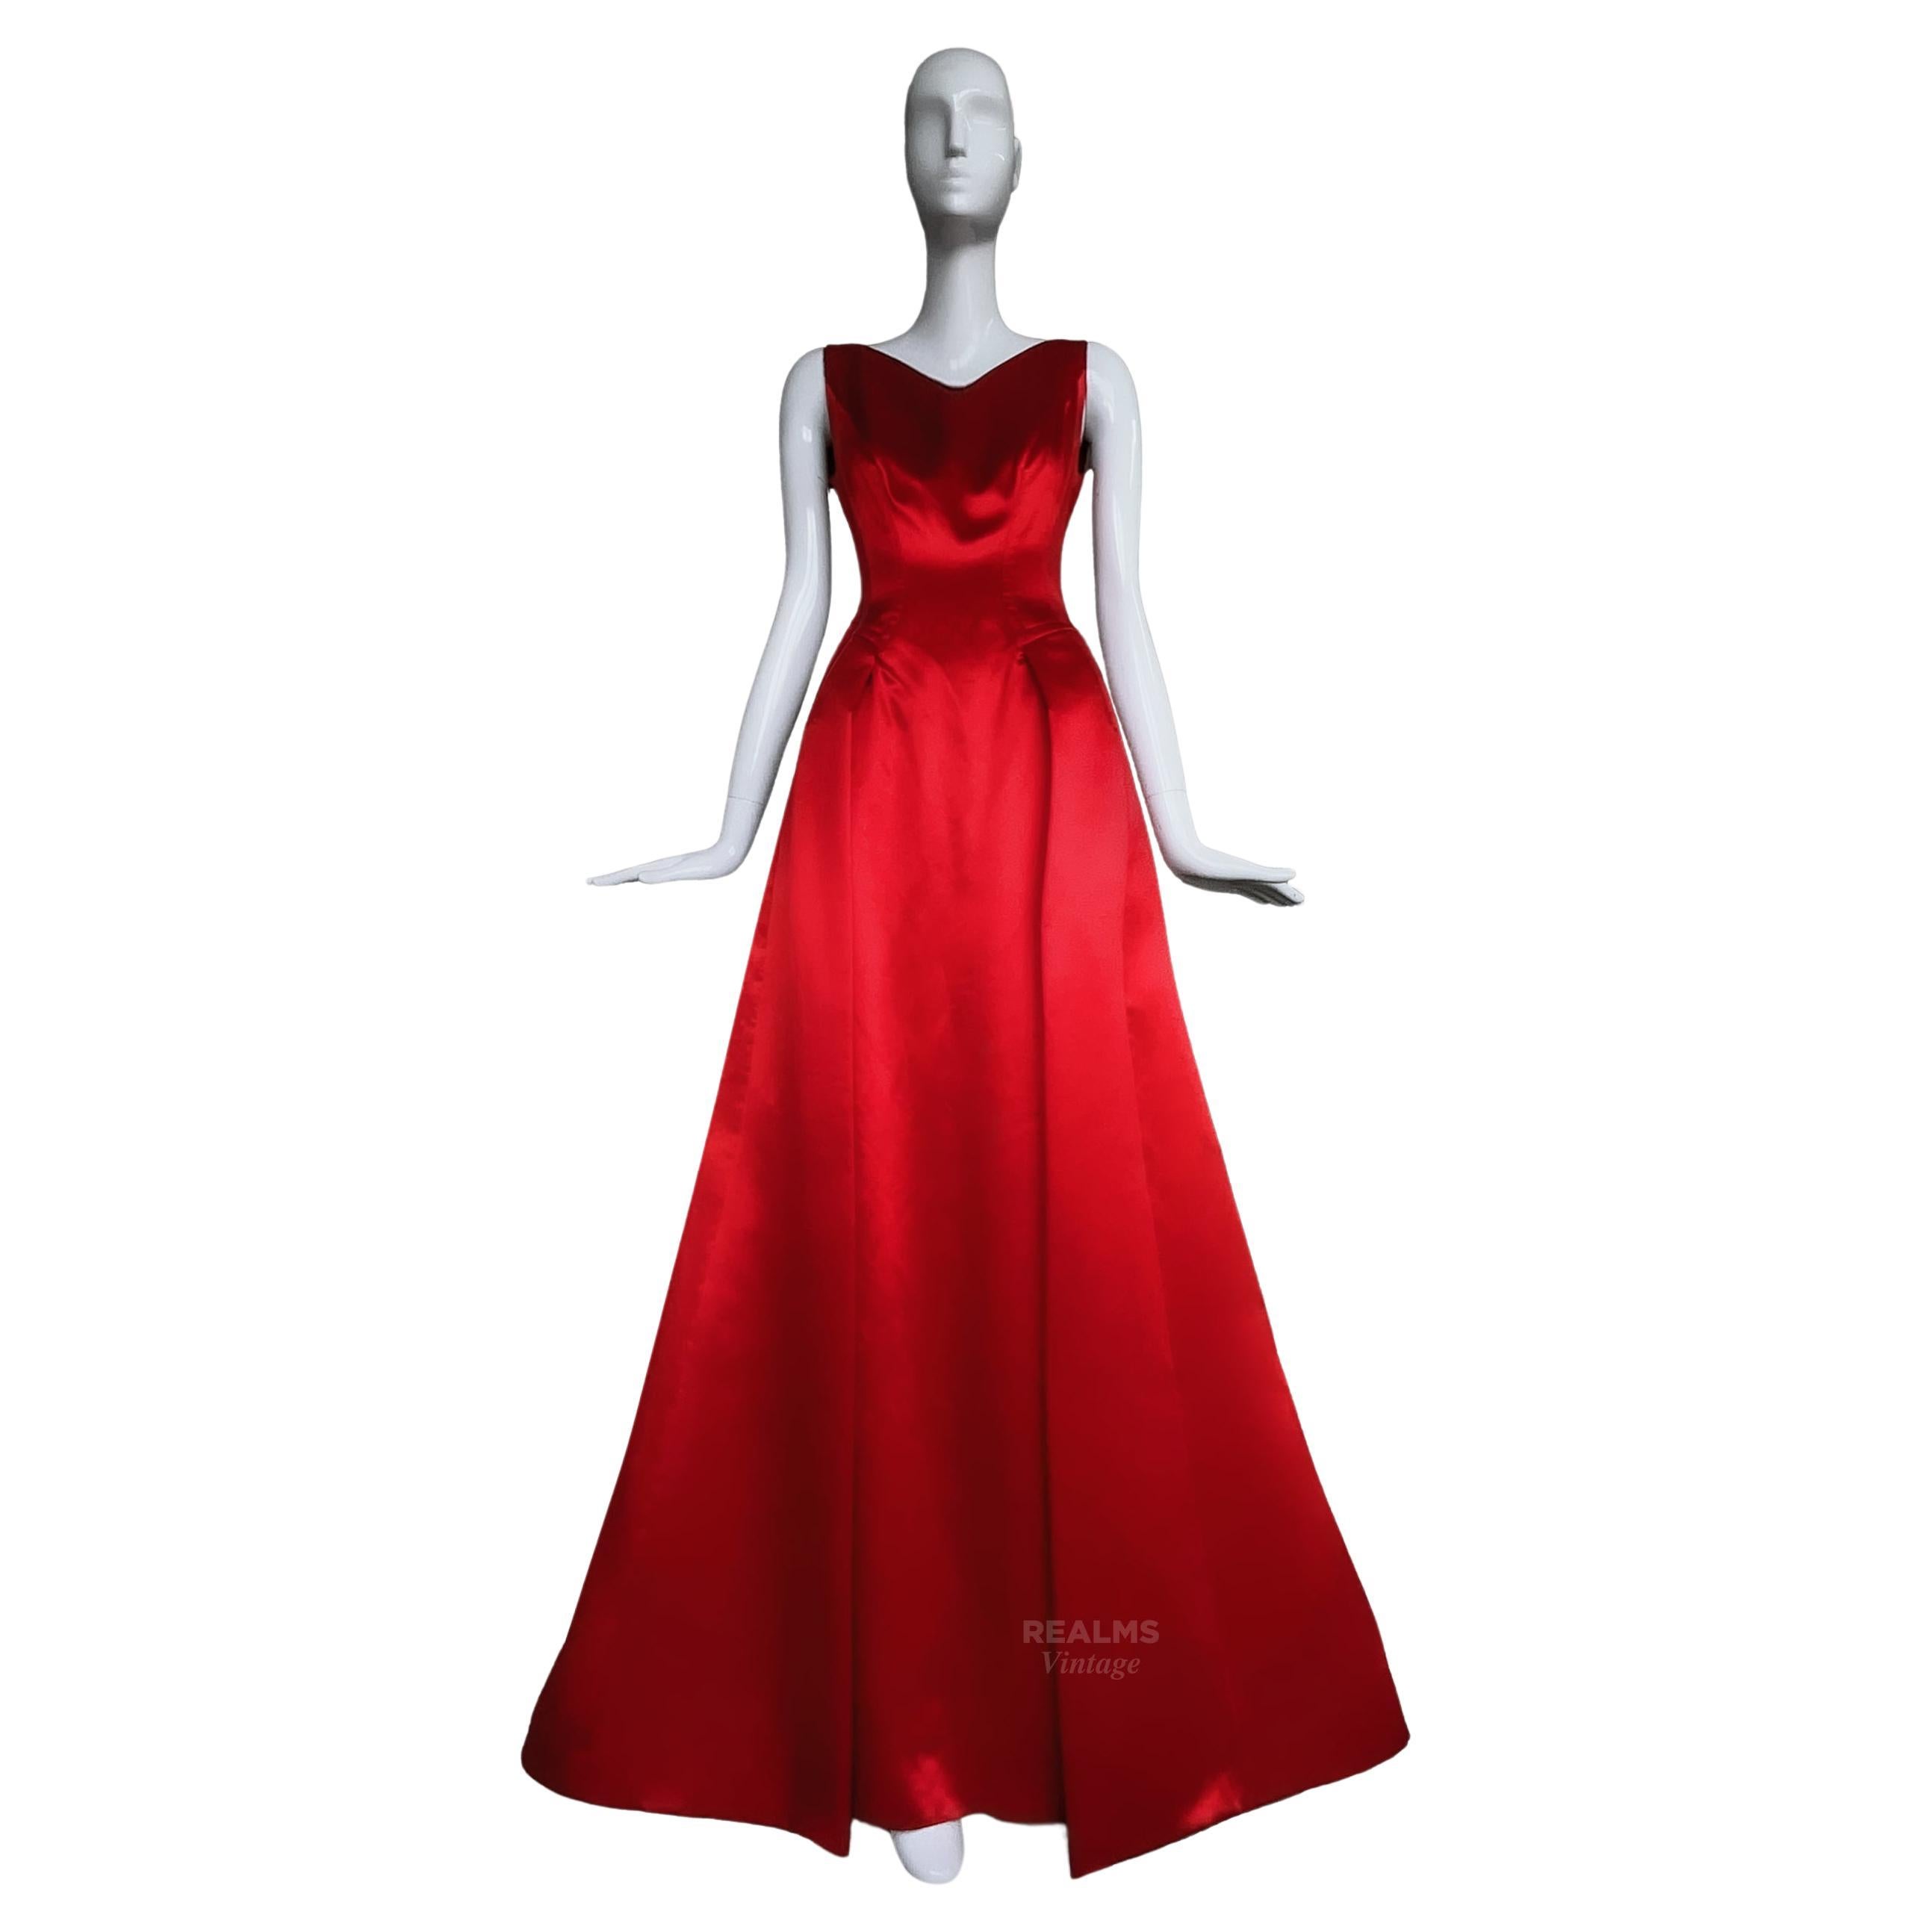  Thierry Mugler Couture FW1999 Goddess Silk Evening Gown Red Dress For Sale